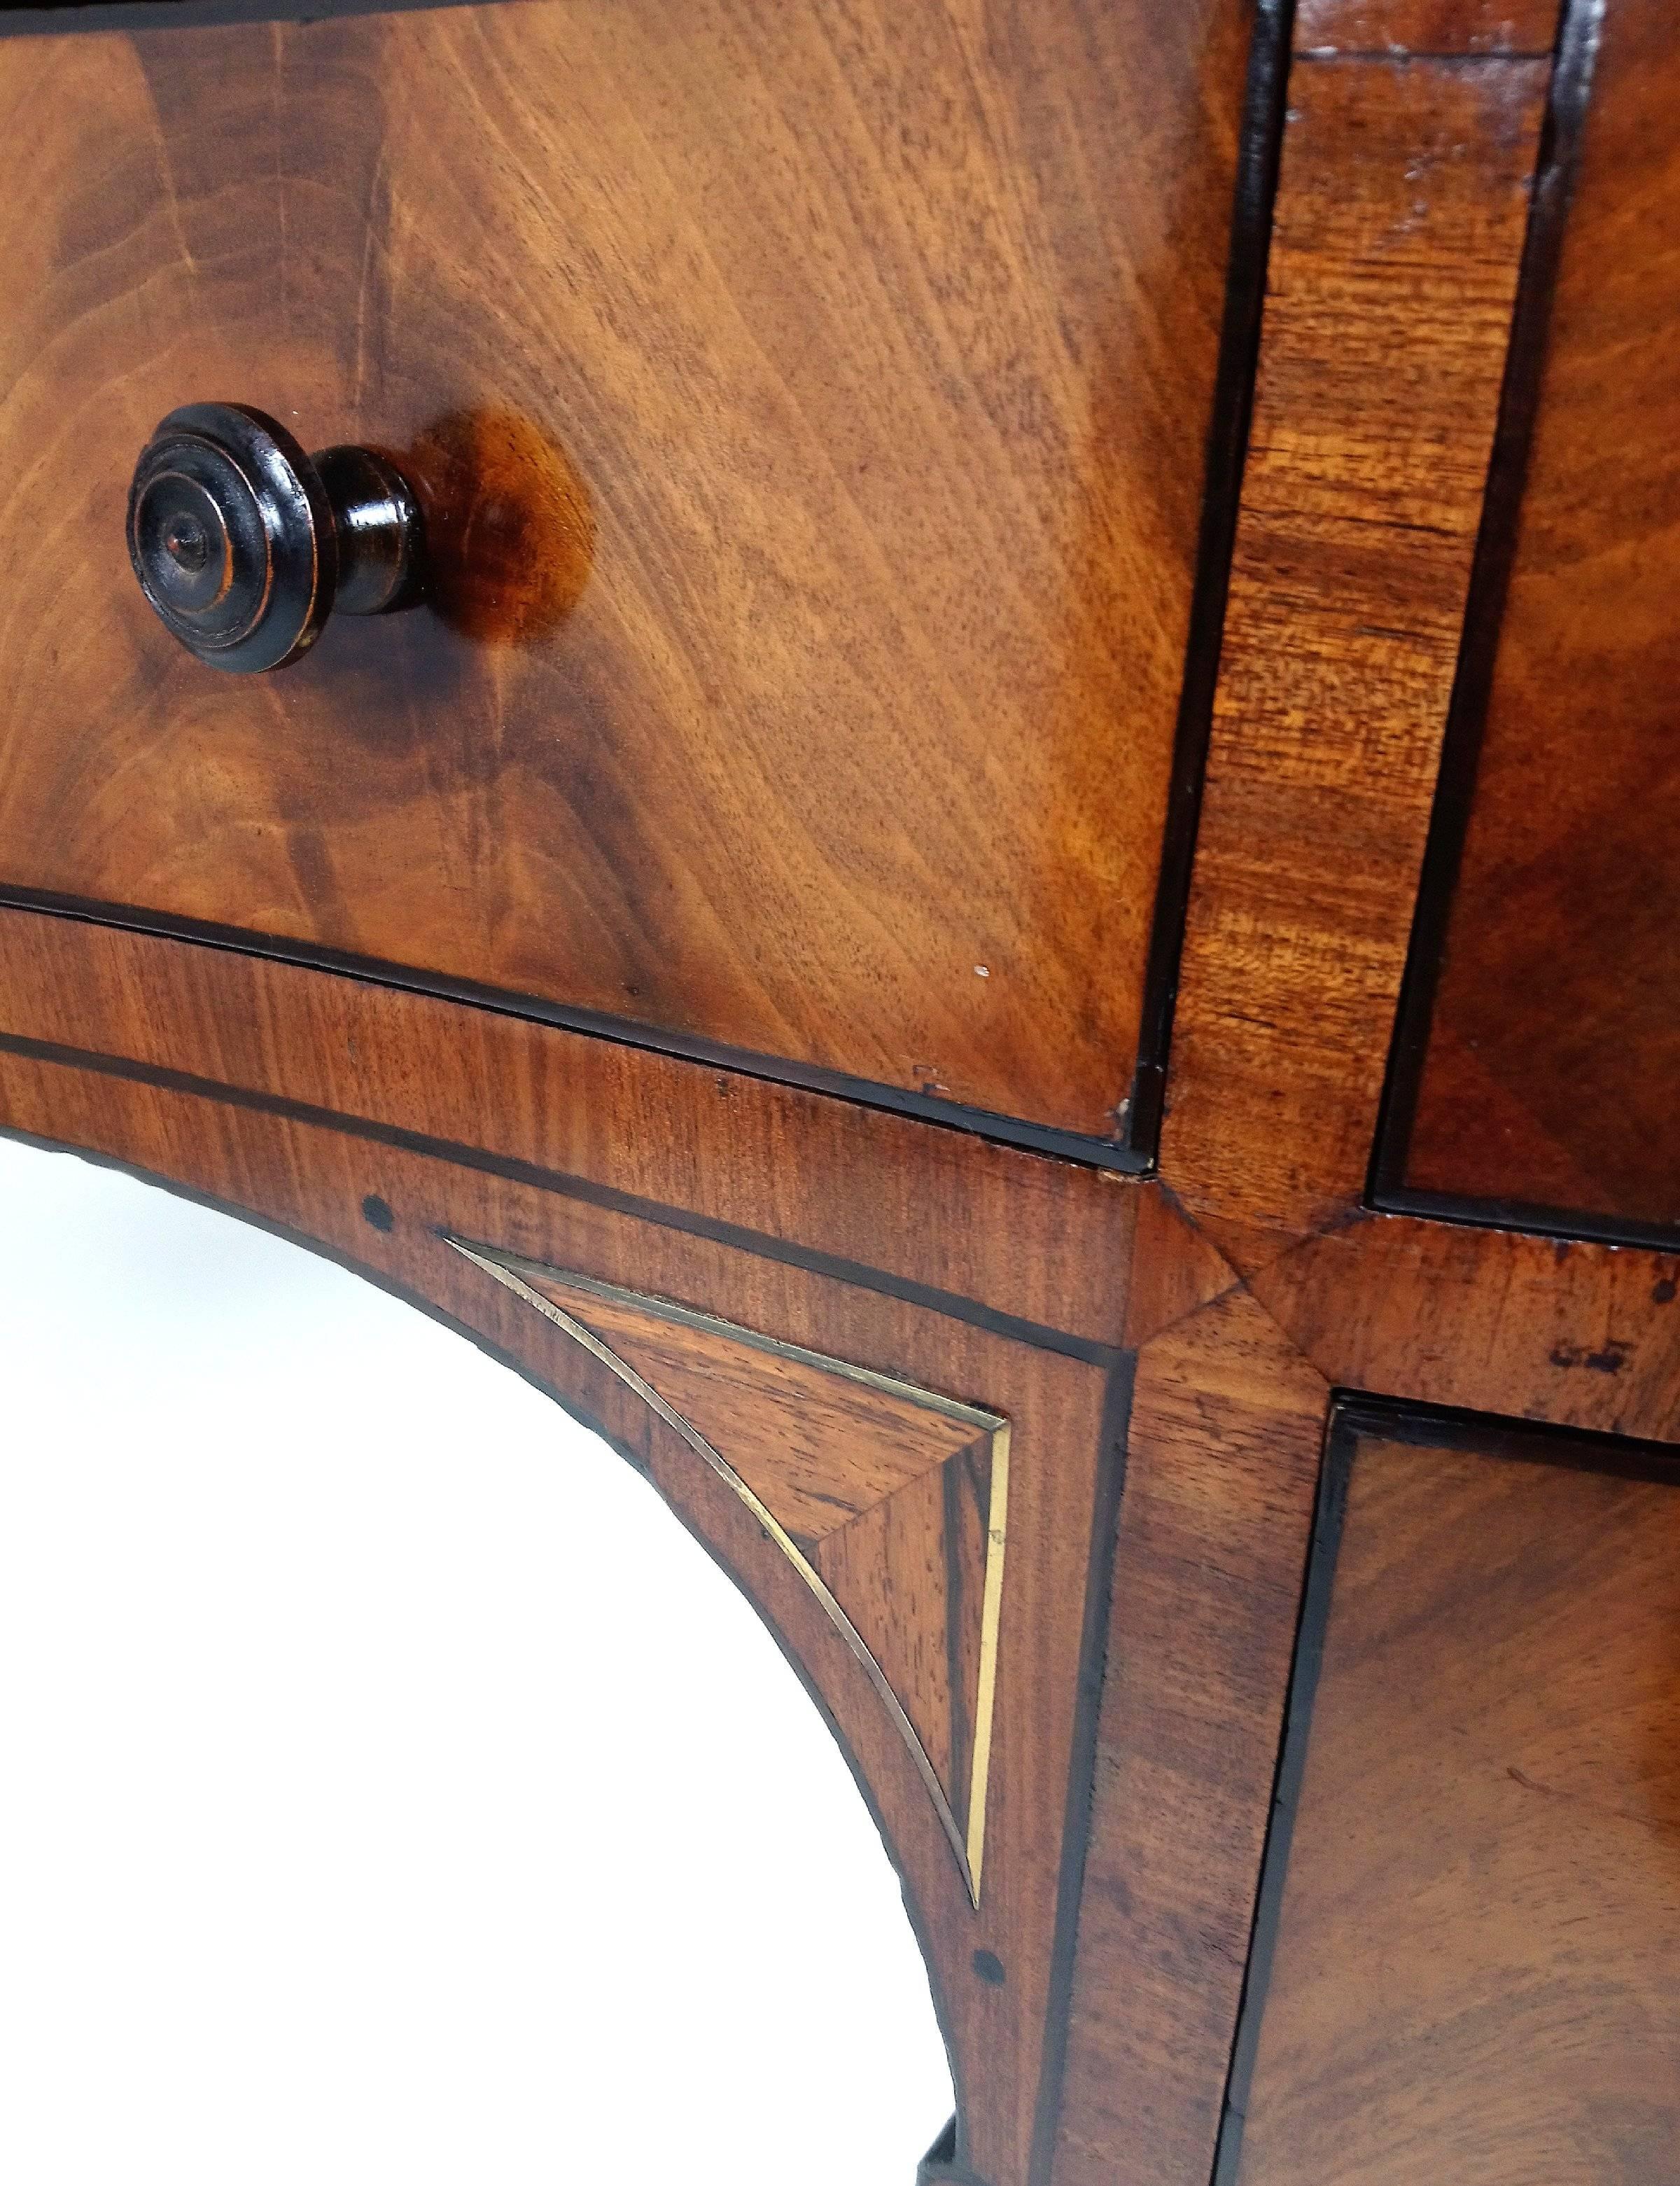 Fine Late Regency Figured Mahogany Knee Hole Sideboard In Excellent Condition In London, west Sussex